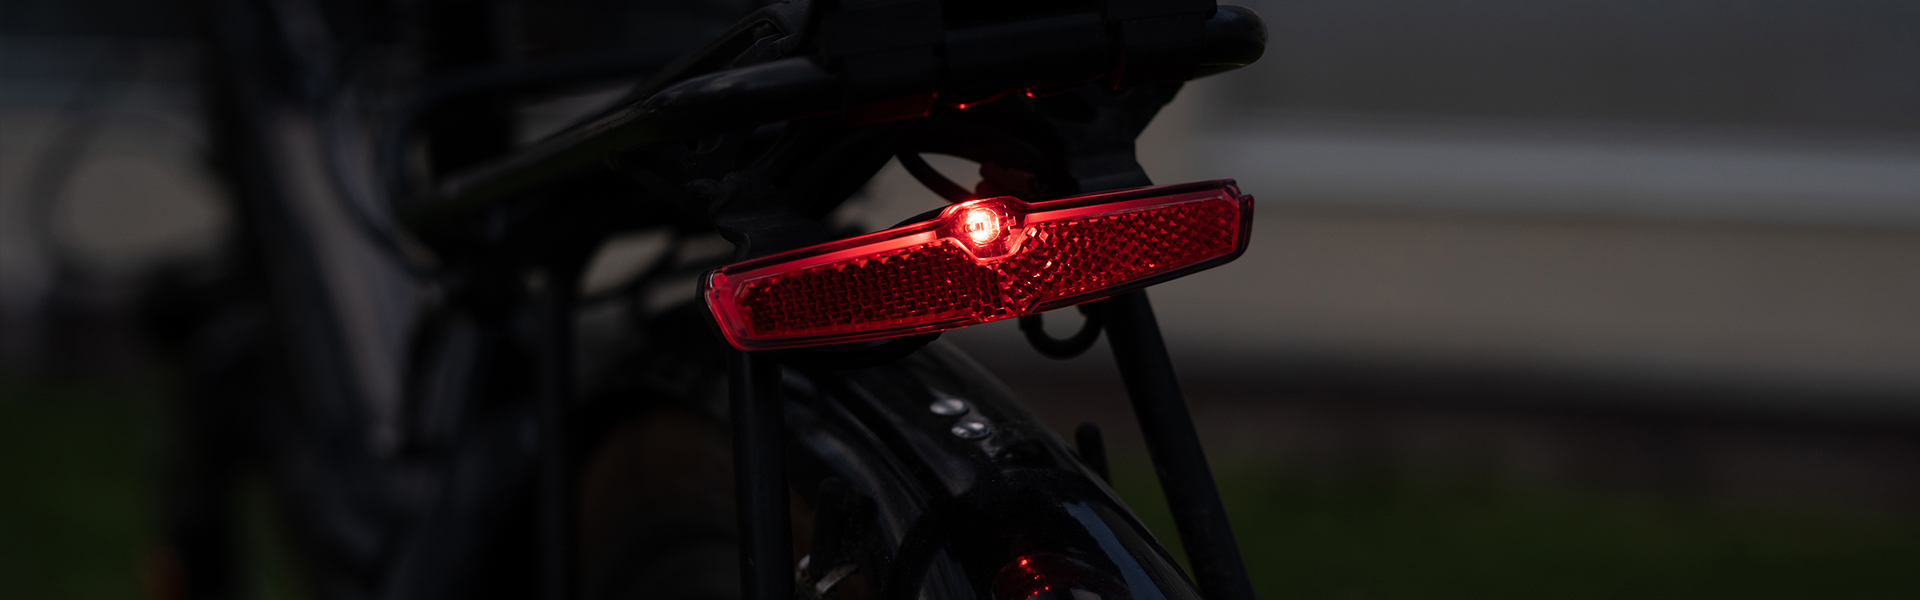 Sate-lite CREE ebike light eletric bike tail light with StVZO  reflector mount on Carrier